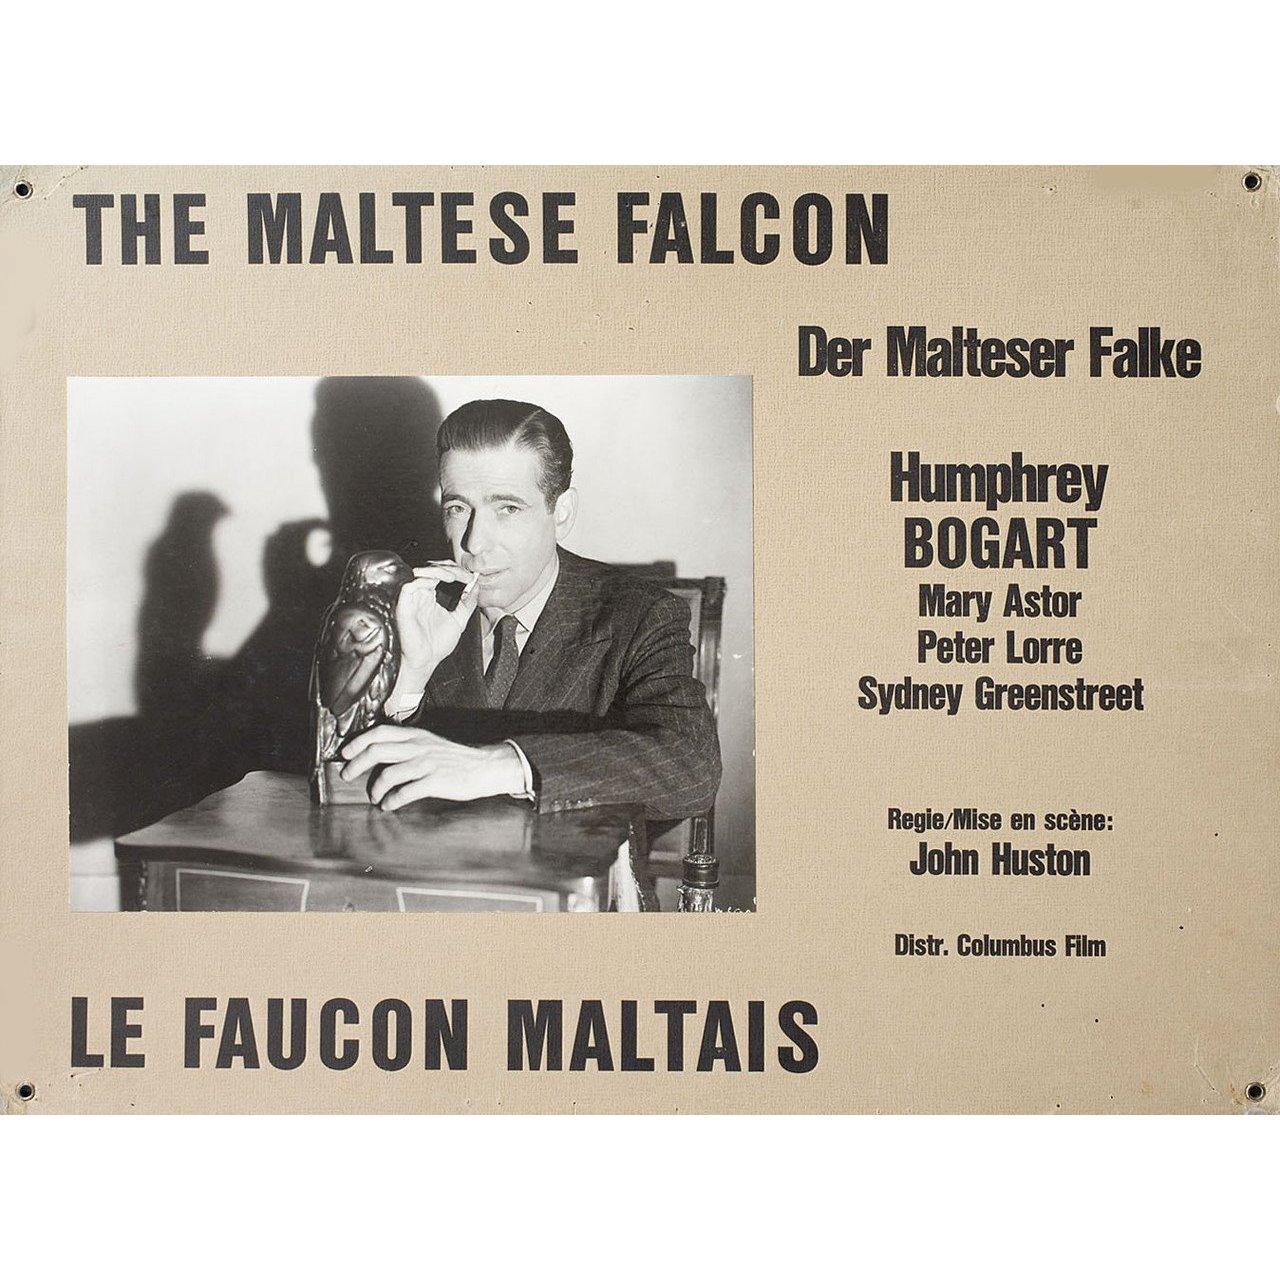 Original 1970s Swiss scene card for the first Swiss theatrical release of the 1941 film The Maltese Falcon directed by John Huston with Humphrey Bogart / Mary Astor / Gladys George / Peter Lorre. Very good-fine condition. Please note: the size is